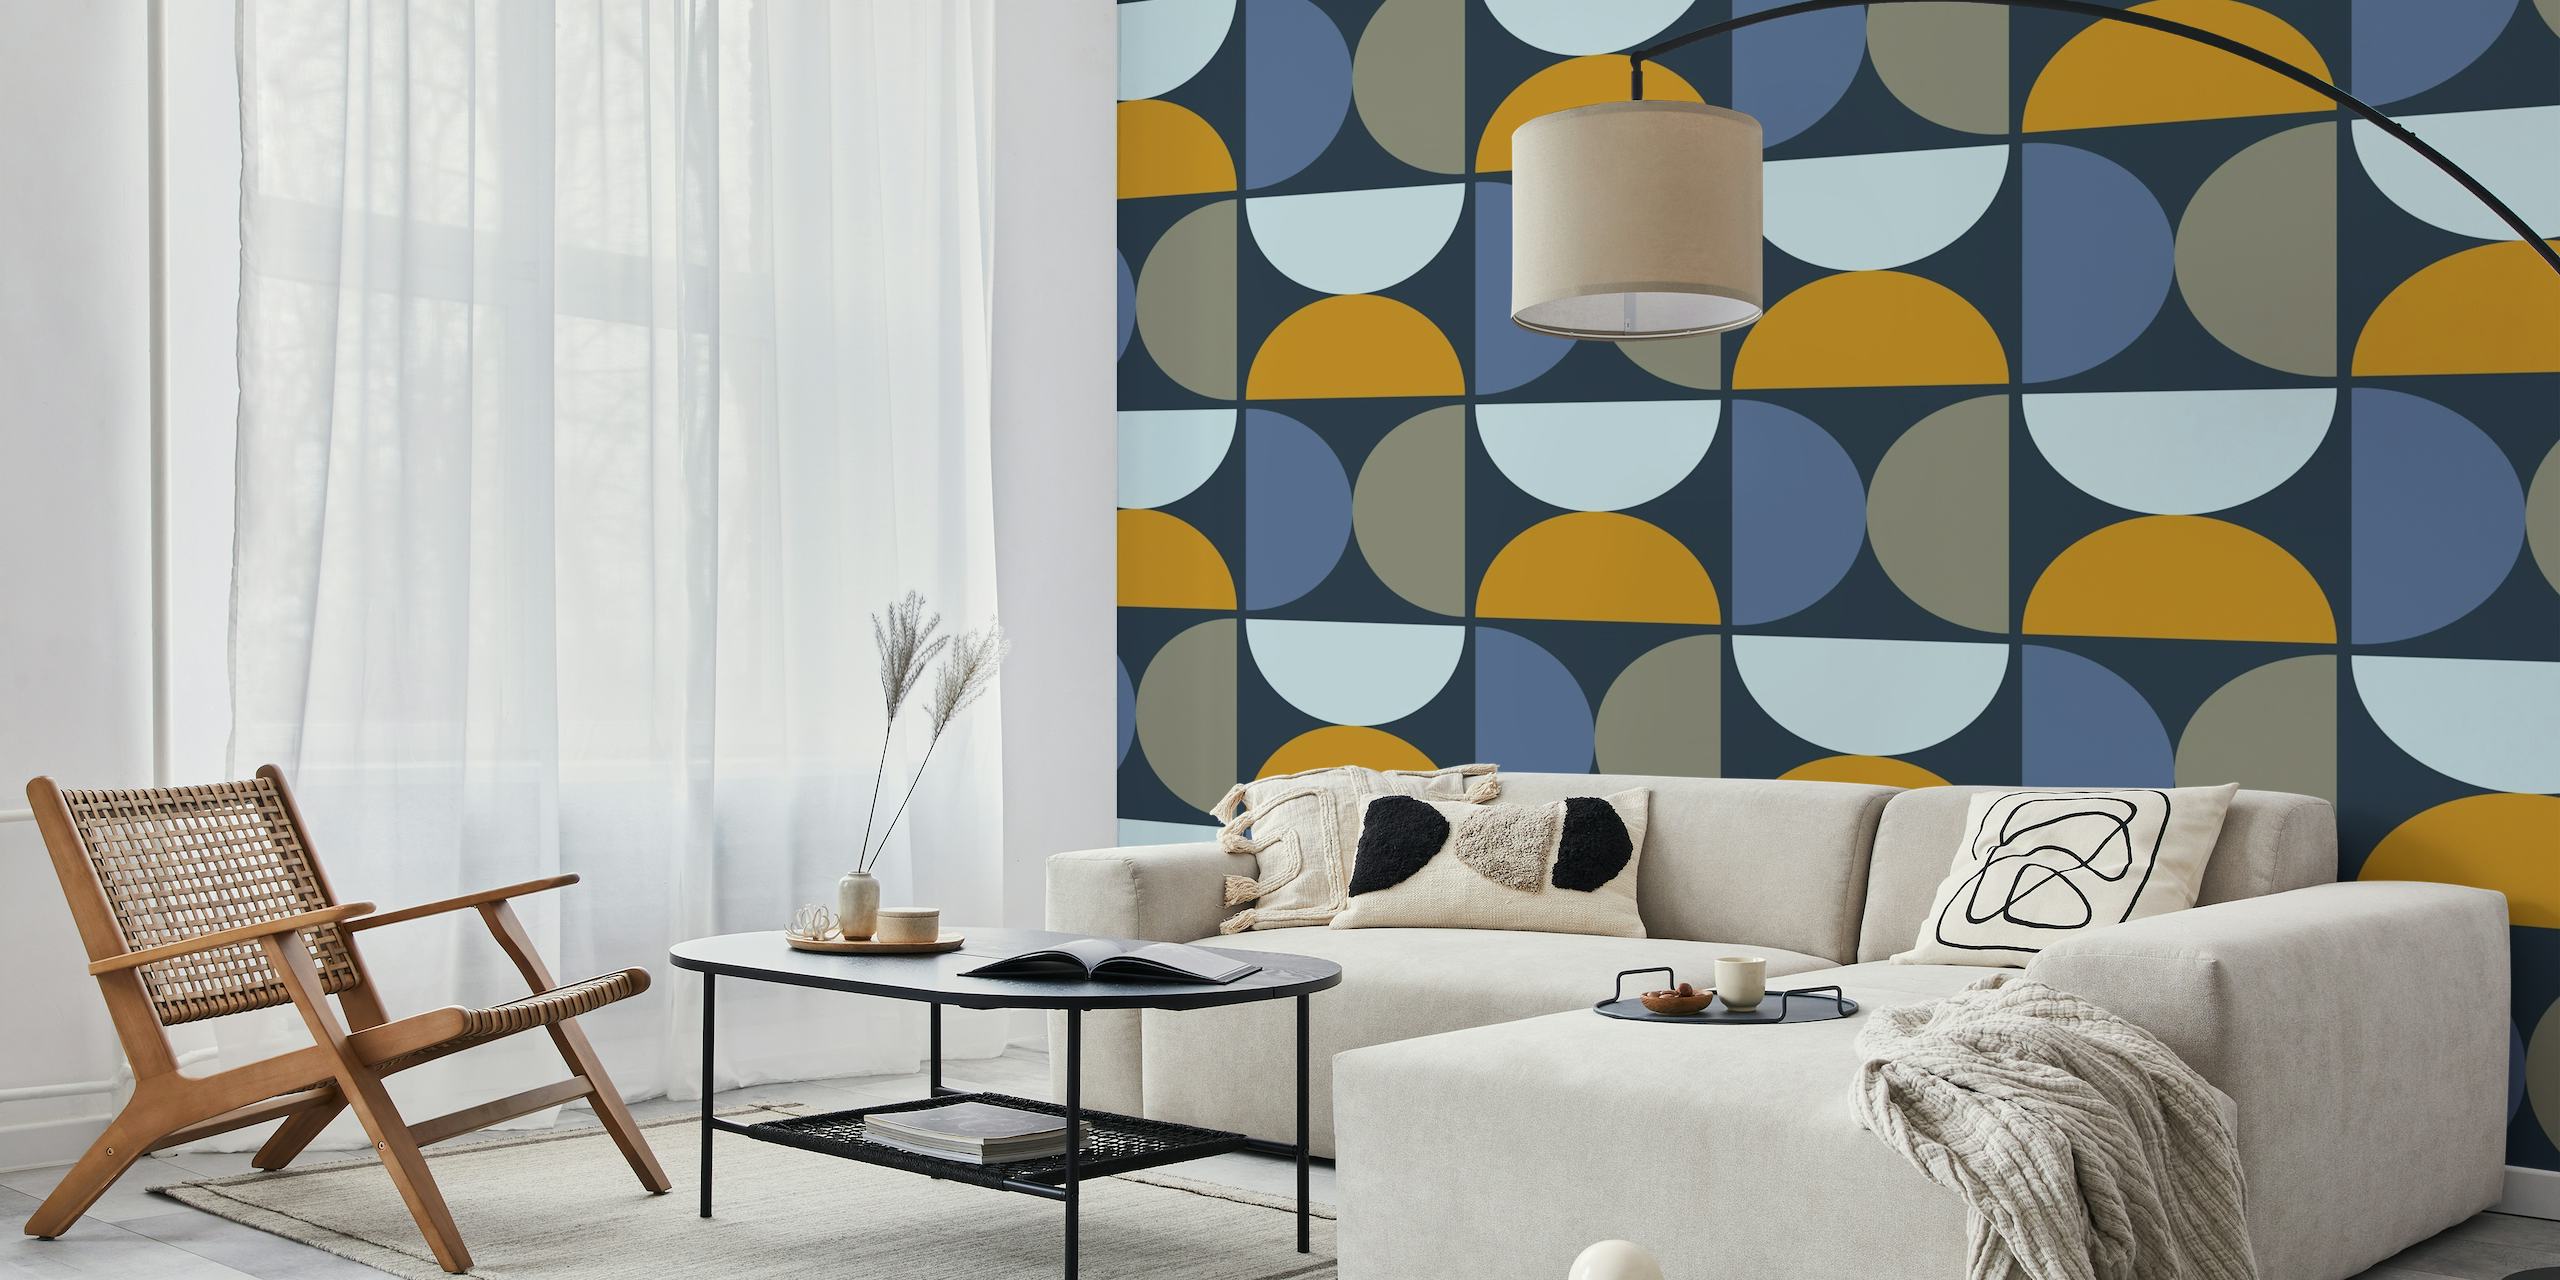 Abstract semicircular patterns in blue, grey, and brown hues titled 'Semicircles 1 - Bossa Nova' for wall mural decoration.